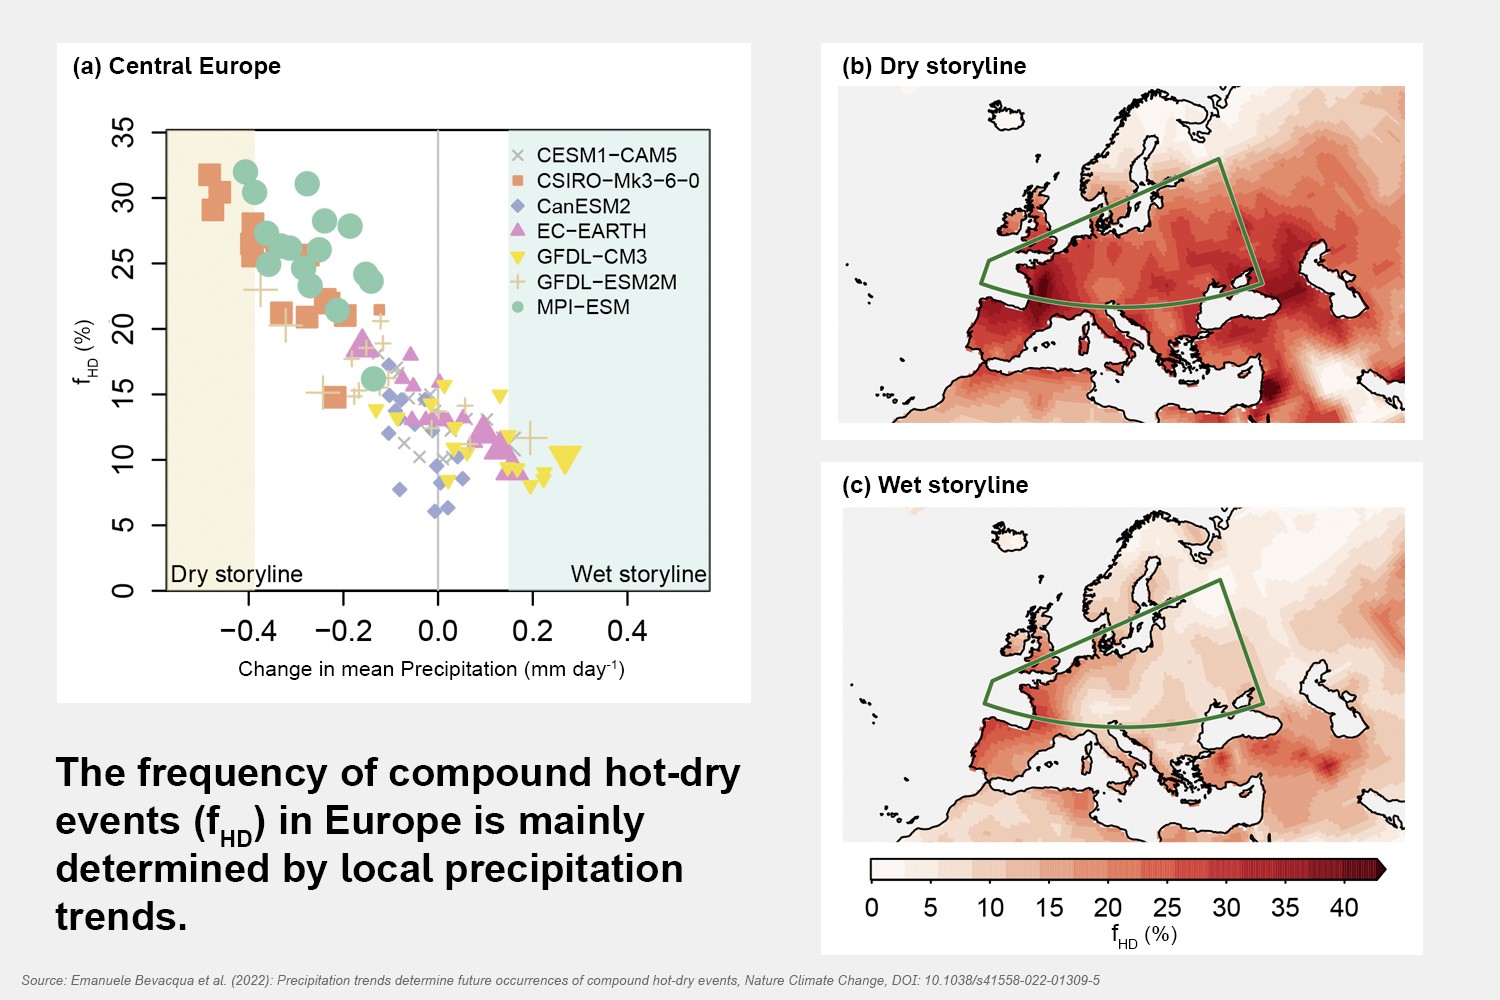 The frequency of compound hot-dry events in Europe is mainly determined by local precipitation trends. Image: © UFZ 